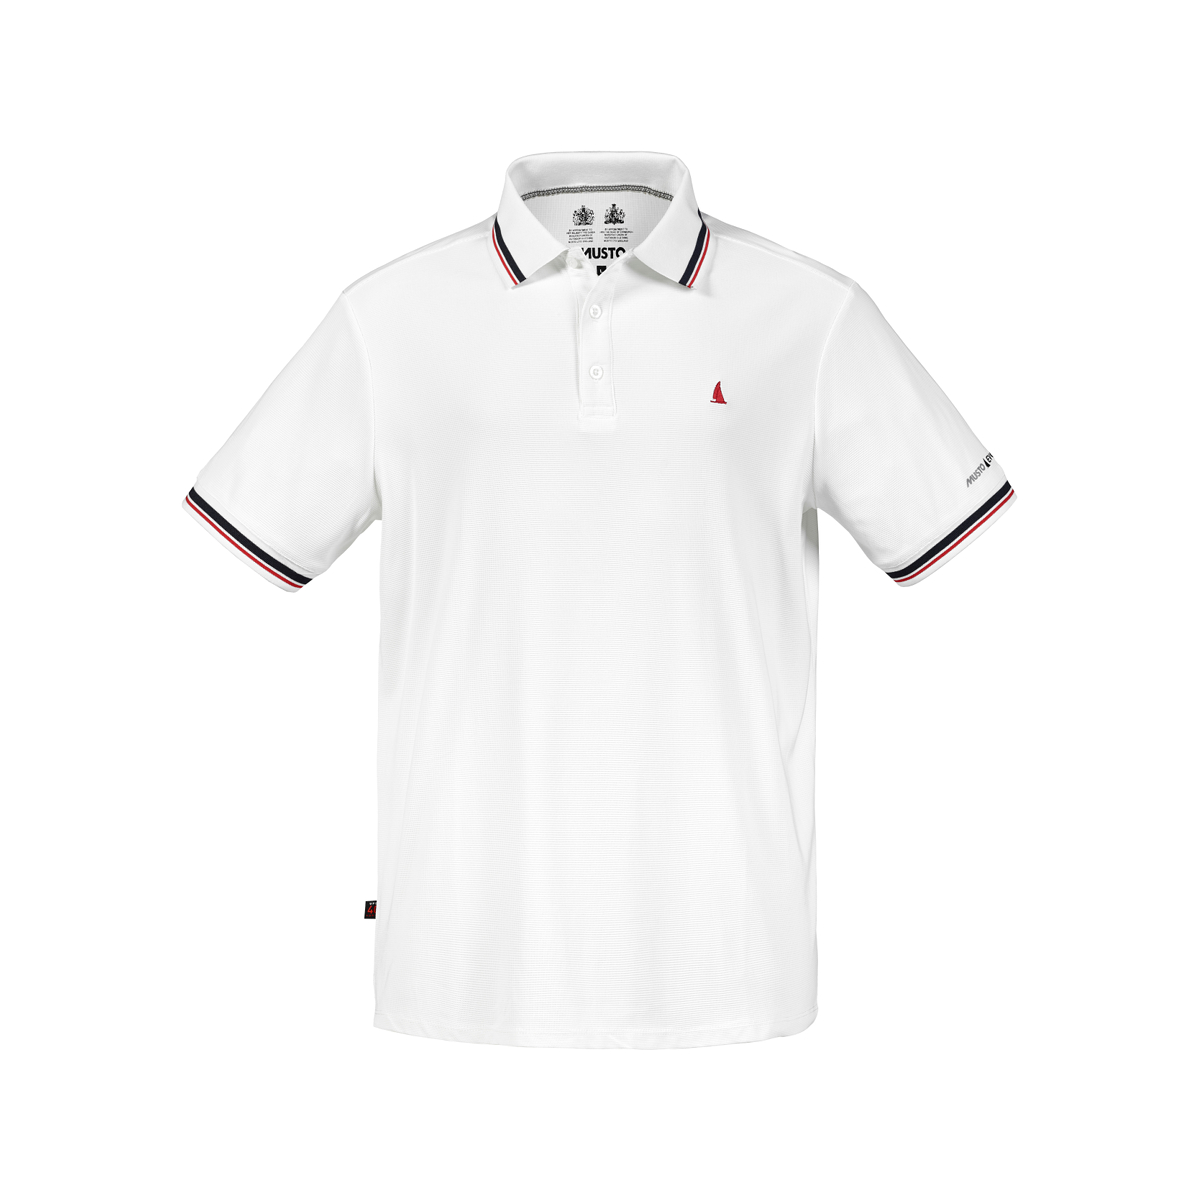 Musto Evolution Pro Lite polo homme blanc, taille S